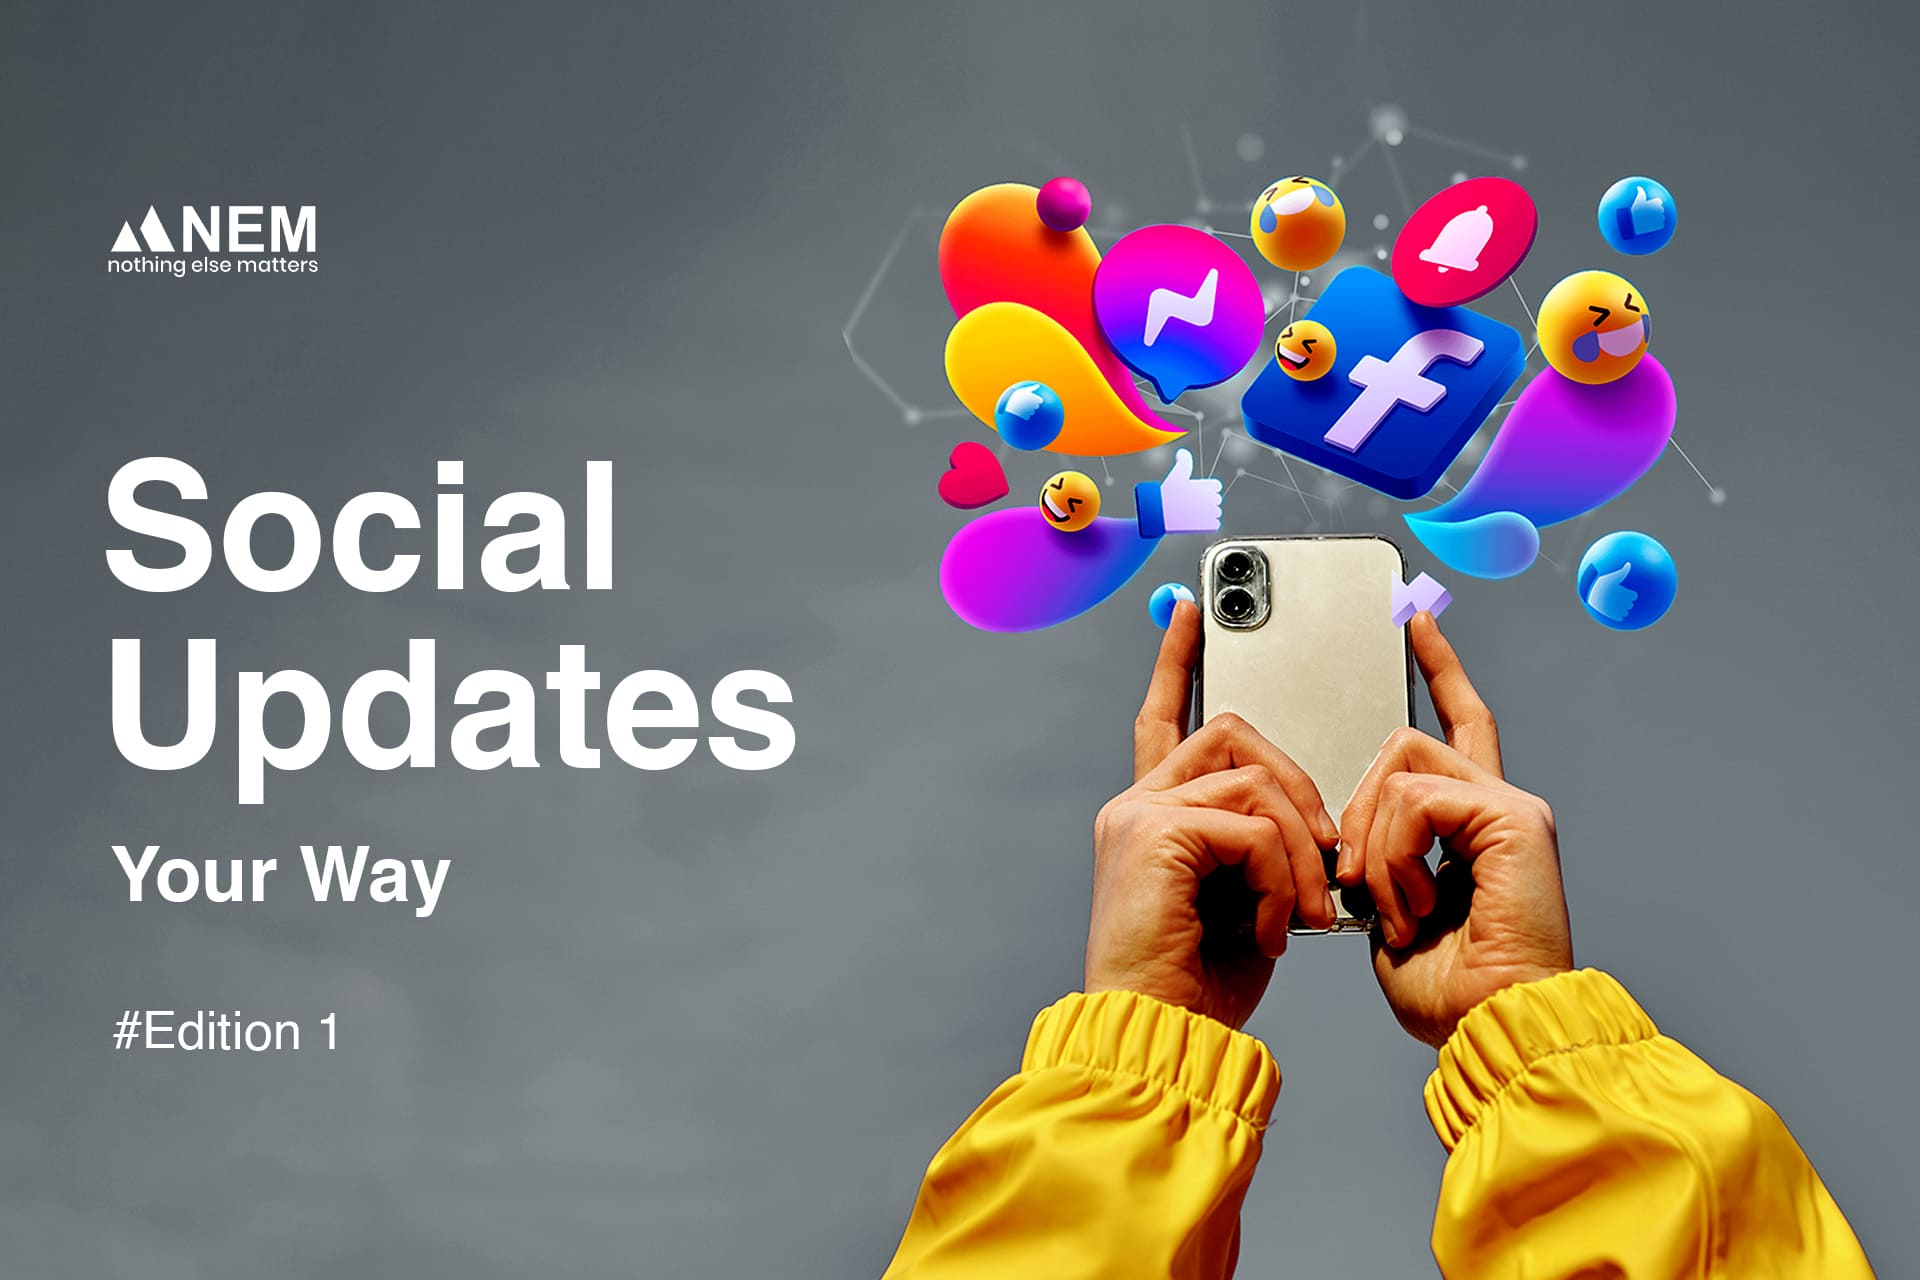 What matters the most in Social Media? Updates from this Week. #Edition 1